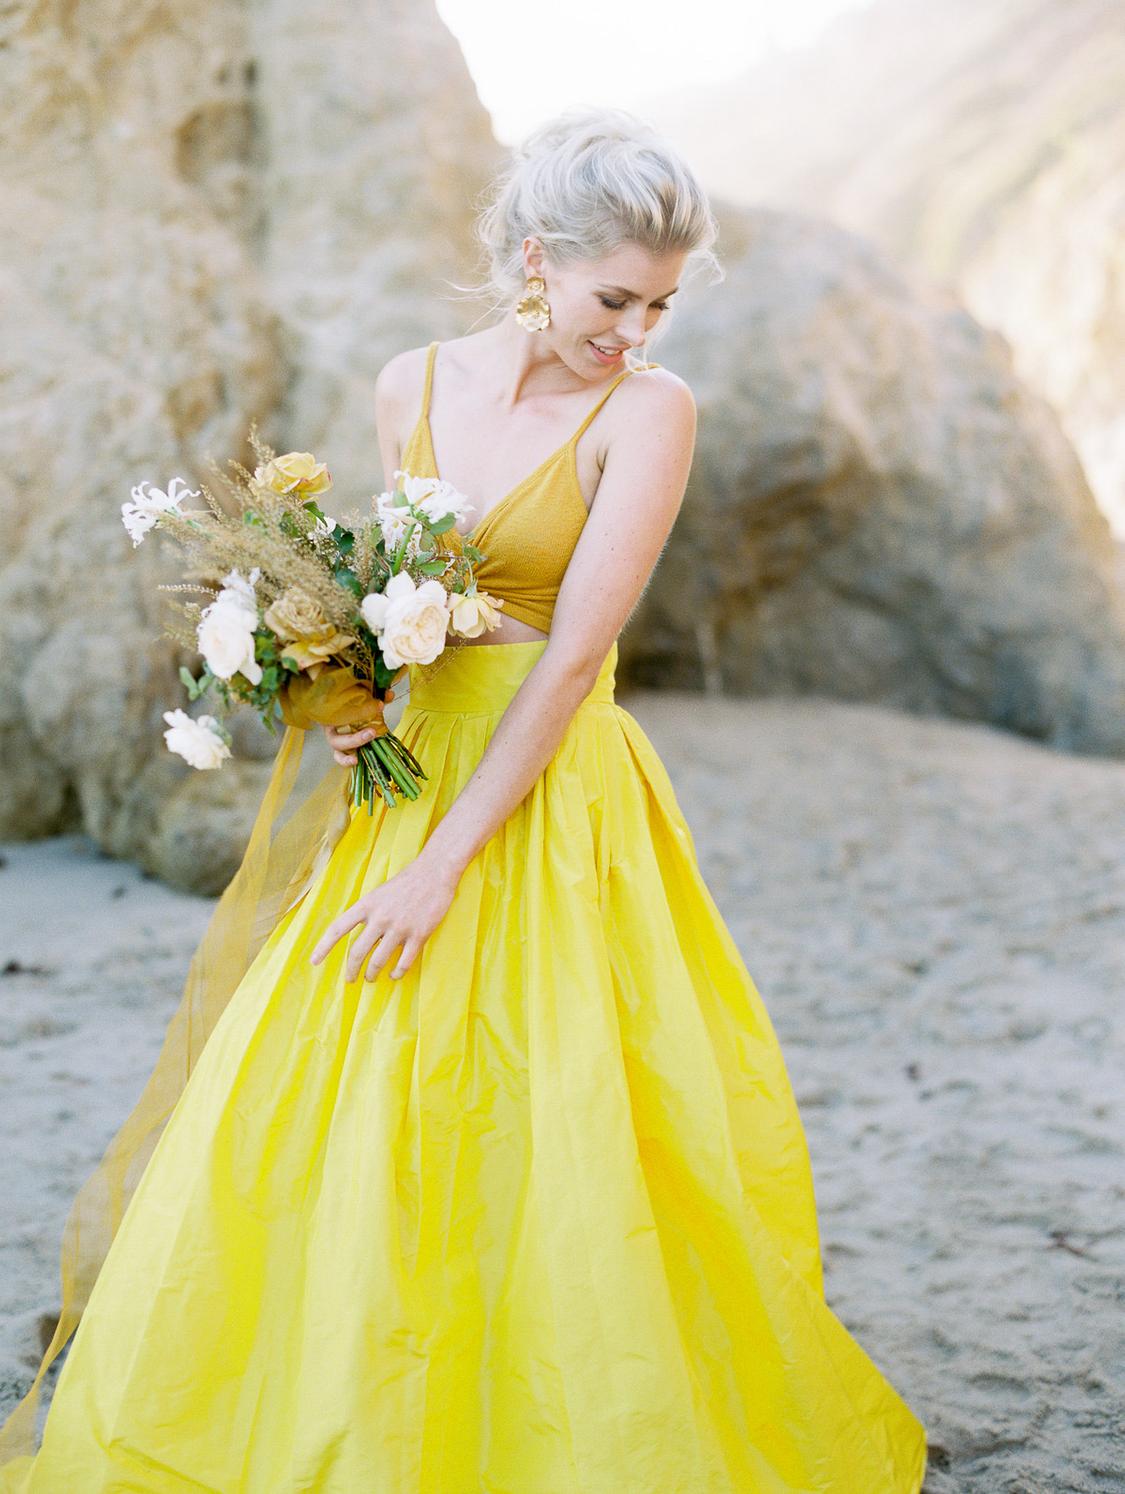 Forget White. This Bride Embraced Color with a Yellow Wedding Dress